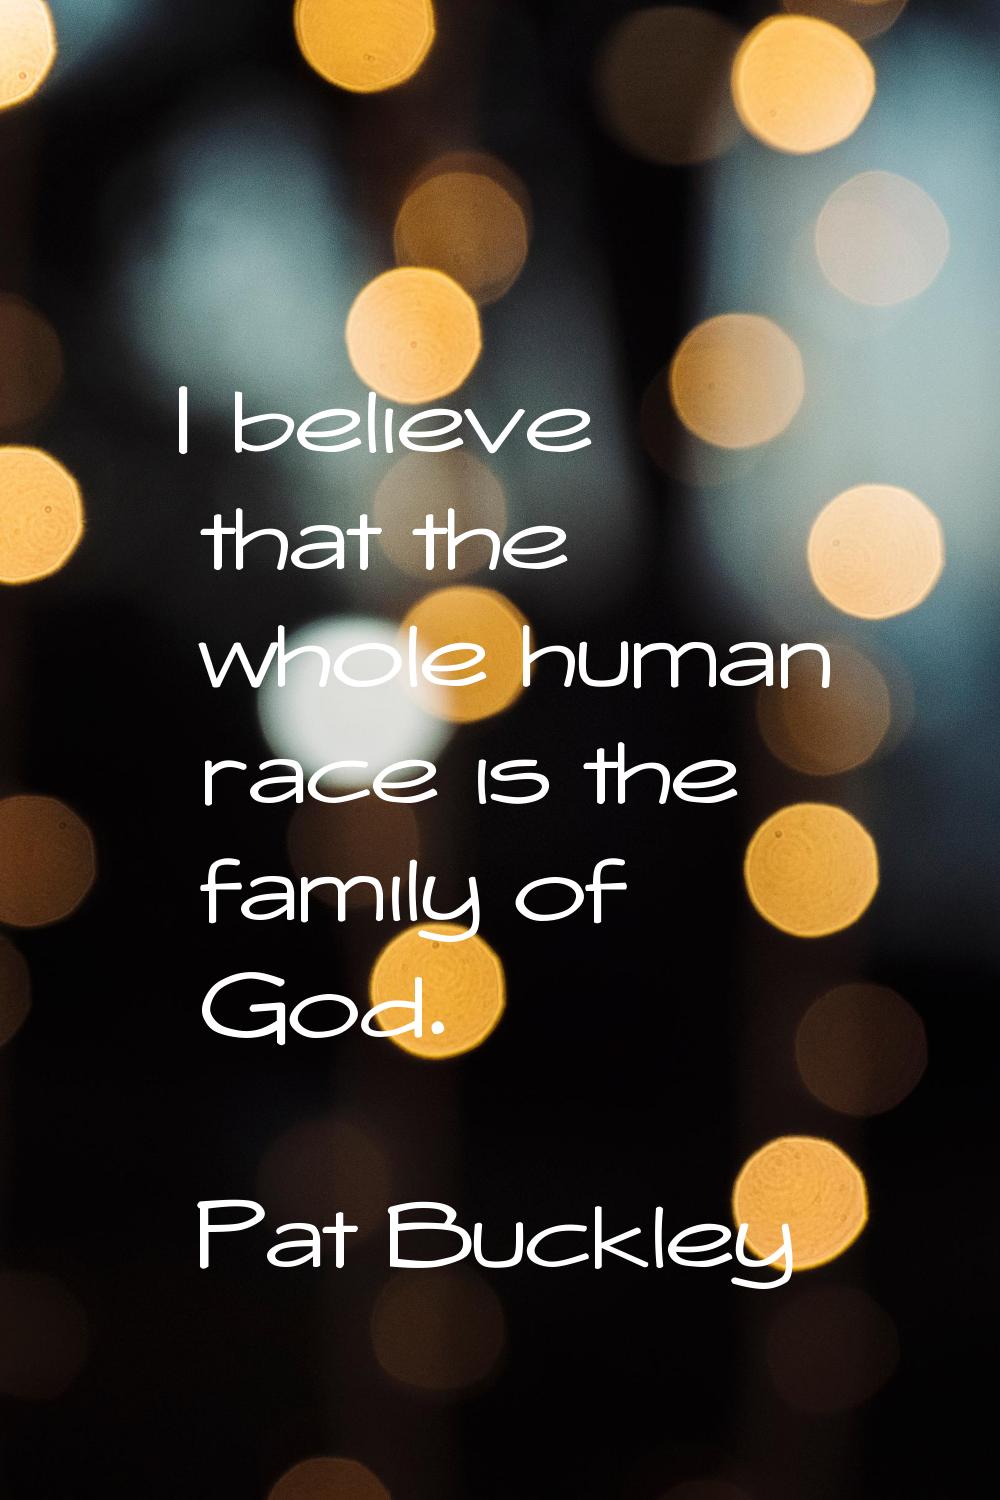 I believe that the whole human race is the family of God.